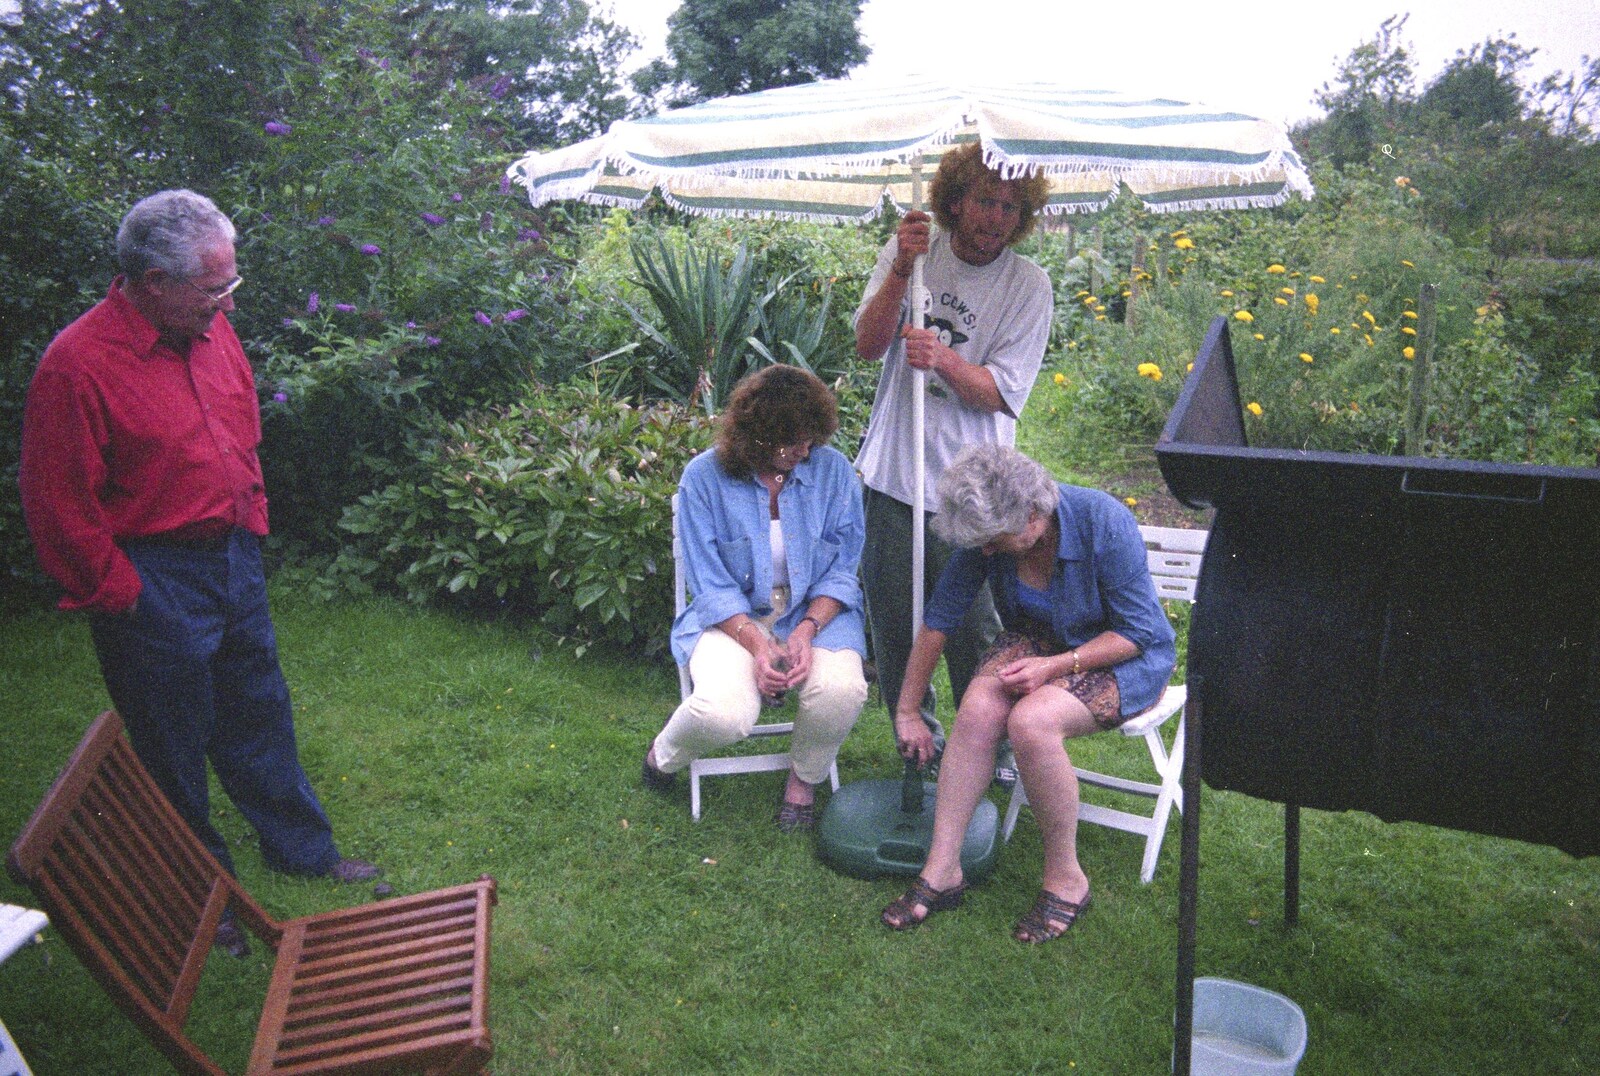 Wavy adjusts the parasol from A Mortlock Barbeque and a CISU Party, Suffolk - 11th July 1999